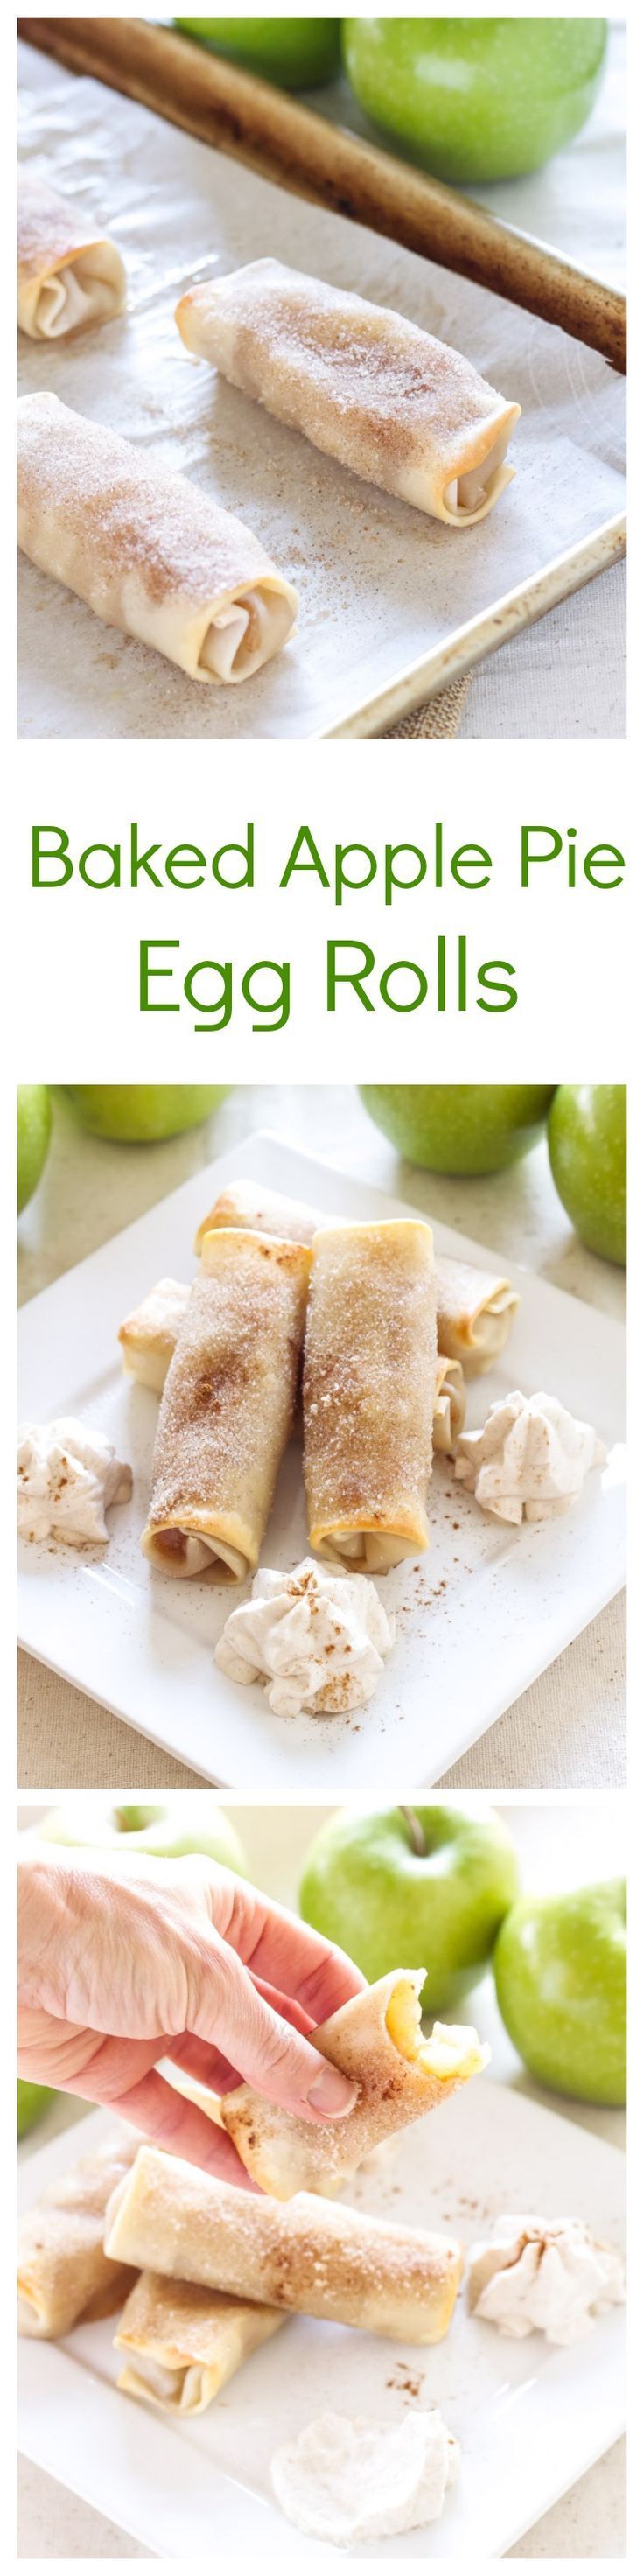 Baked Apple Pie Egg Rolls | Recipe Runner | A fun and easy to make alternative to apple pie!